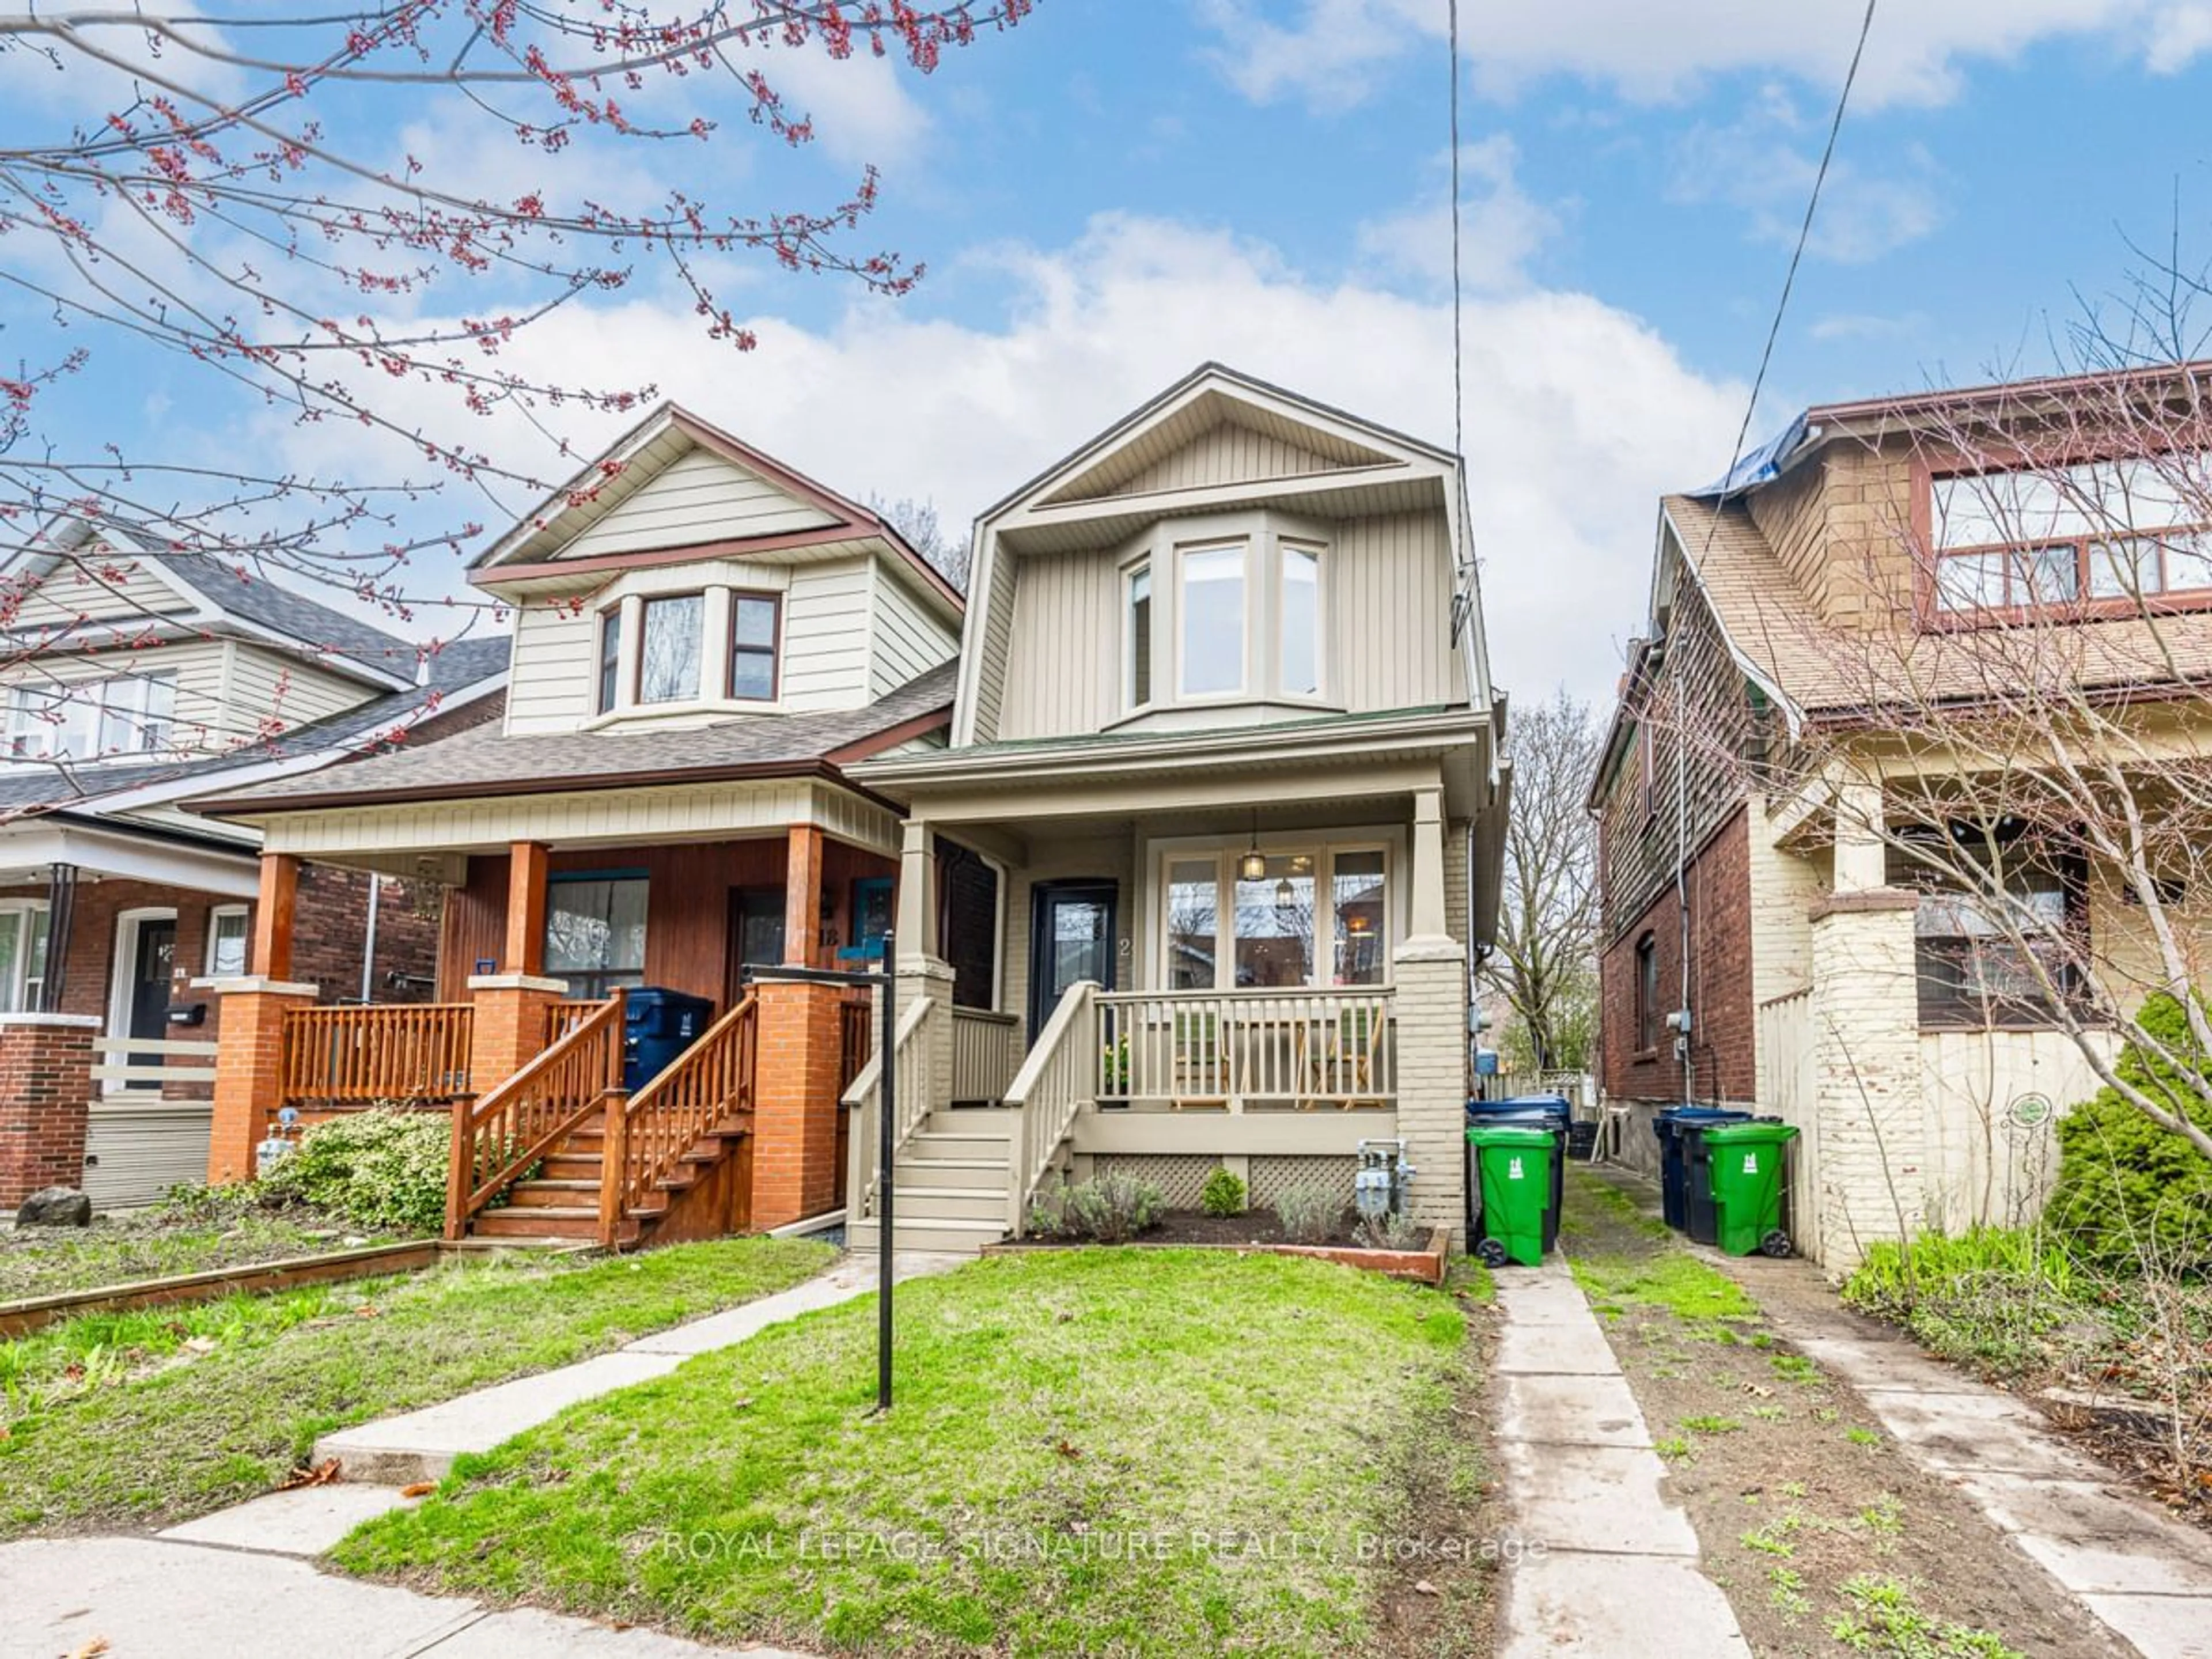 Frontside or backside of a home for 20 Cedarvale Ave, Toronto Ontario M4C 4J4